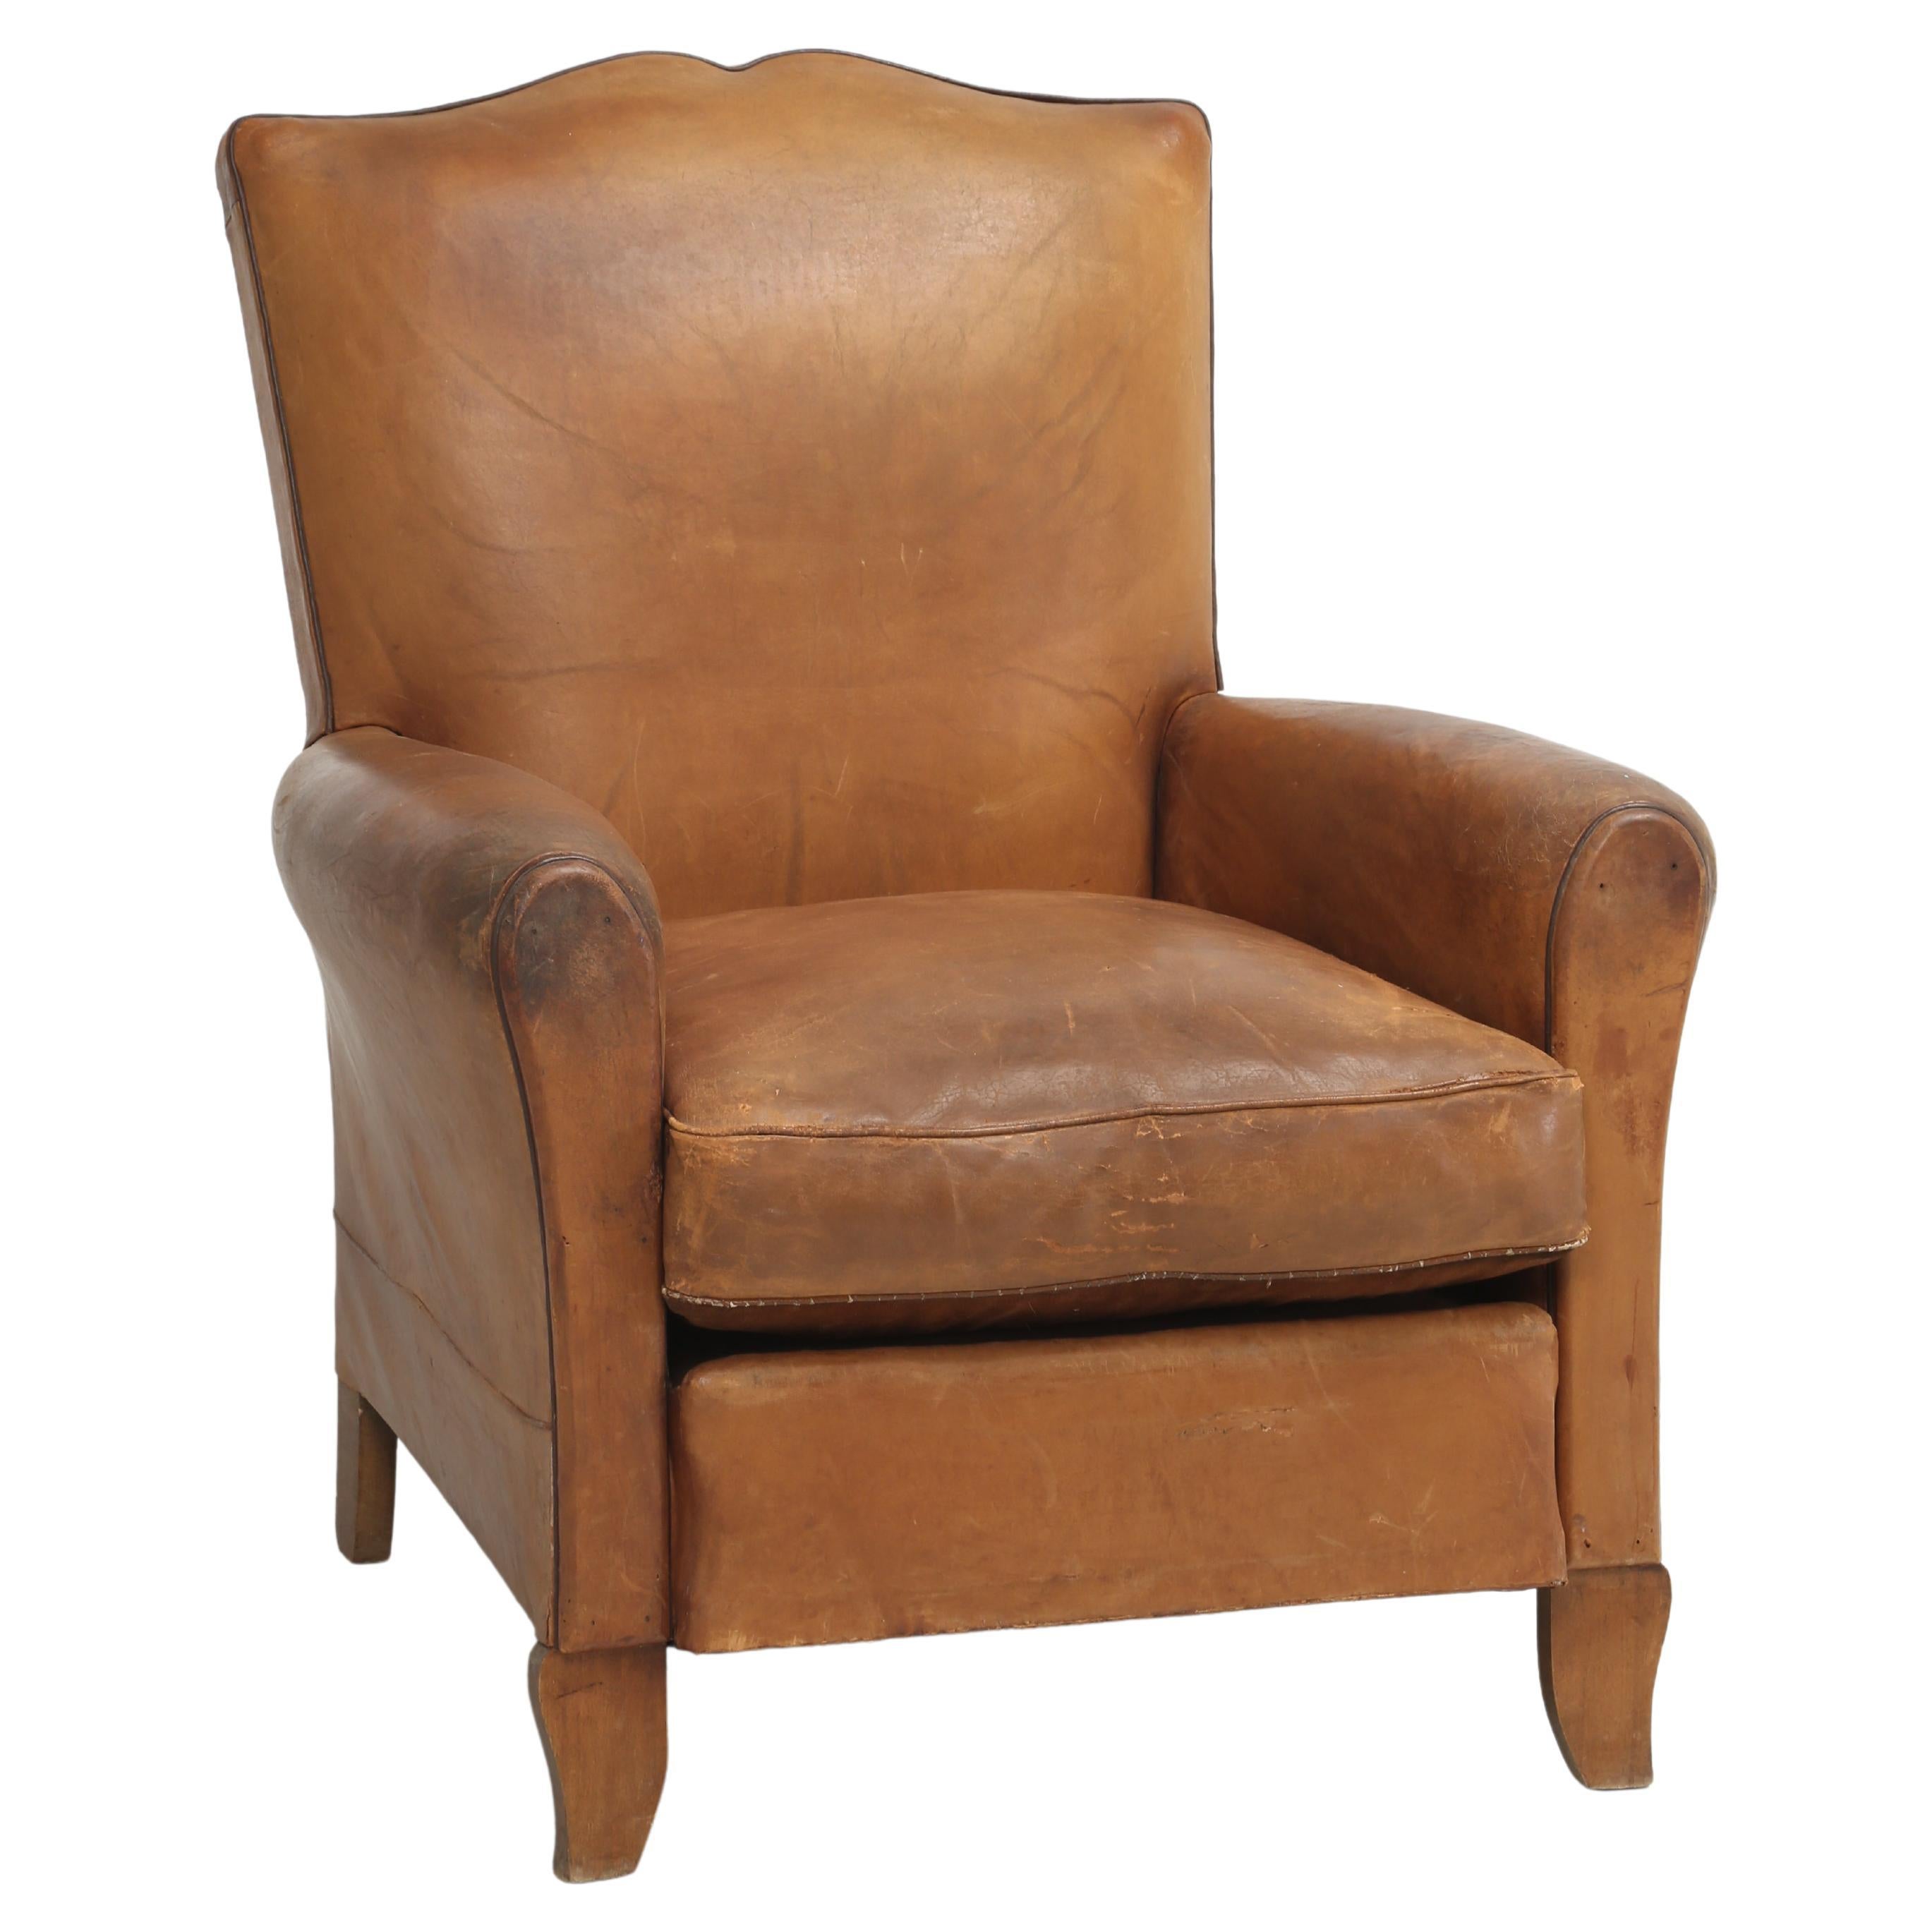 Vintage French Club Chair in All Original Leather Properly Internally Restored 